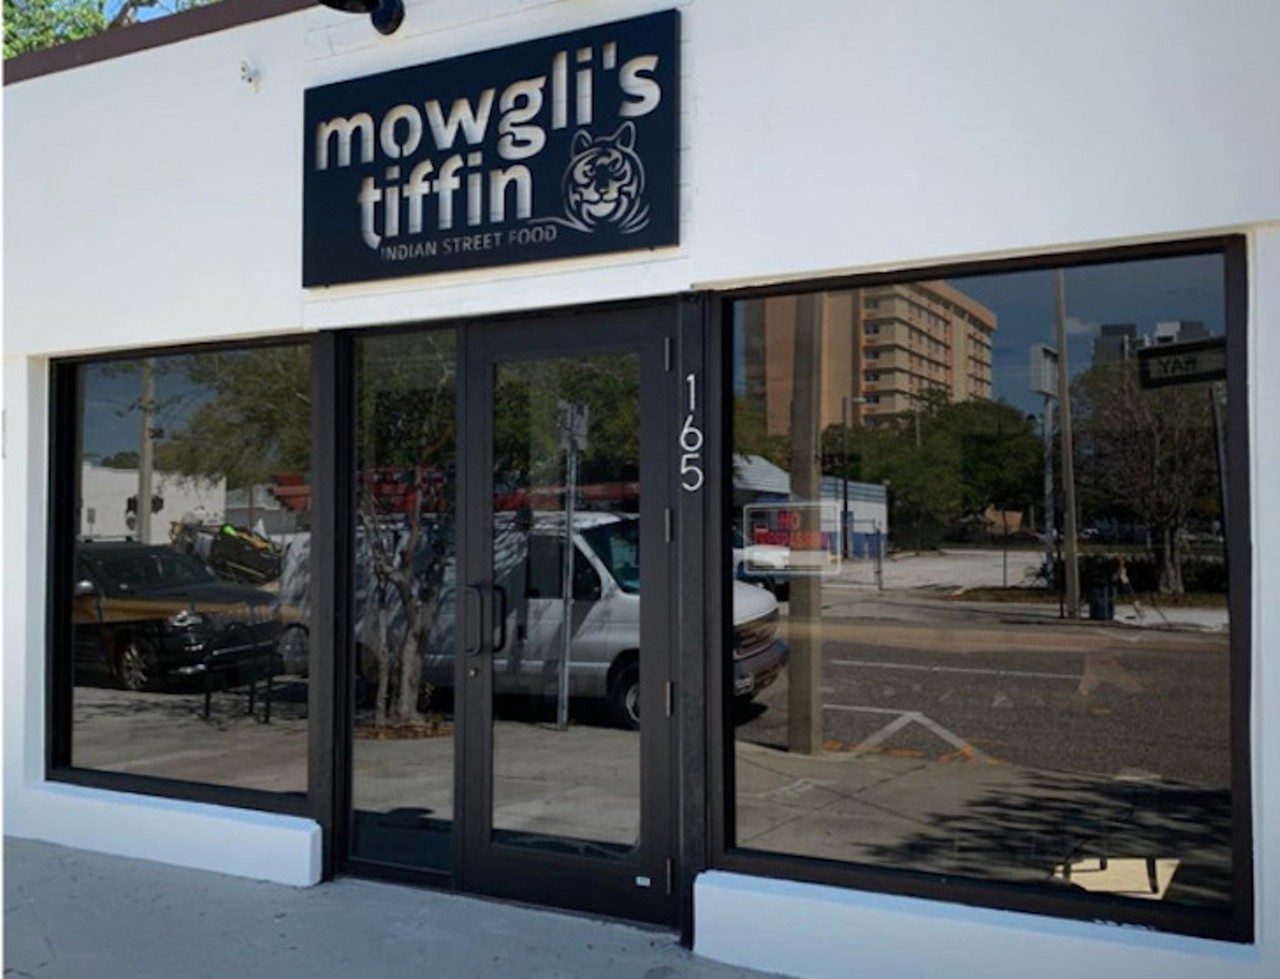 Mowgli&#146;s Tiffin
165 Dr. MLK St. N., St. Petersburg
Mowgli&#146;s Tiffin is an upcoming Indian street food restaurant in St. Pete. The 16 seat, 526-square-foot restaurant is based around a user-friendly, limited menu which will include a twist on the traditional kati roll and more.
Photo via Hot Metal Designs/Instagram